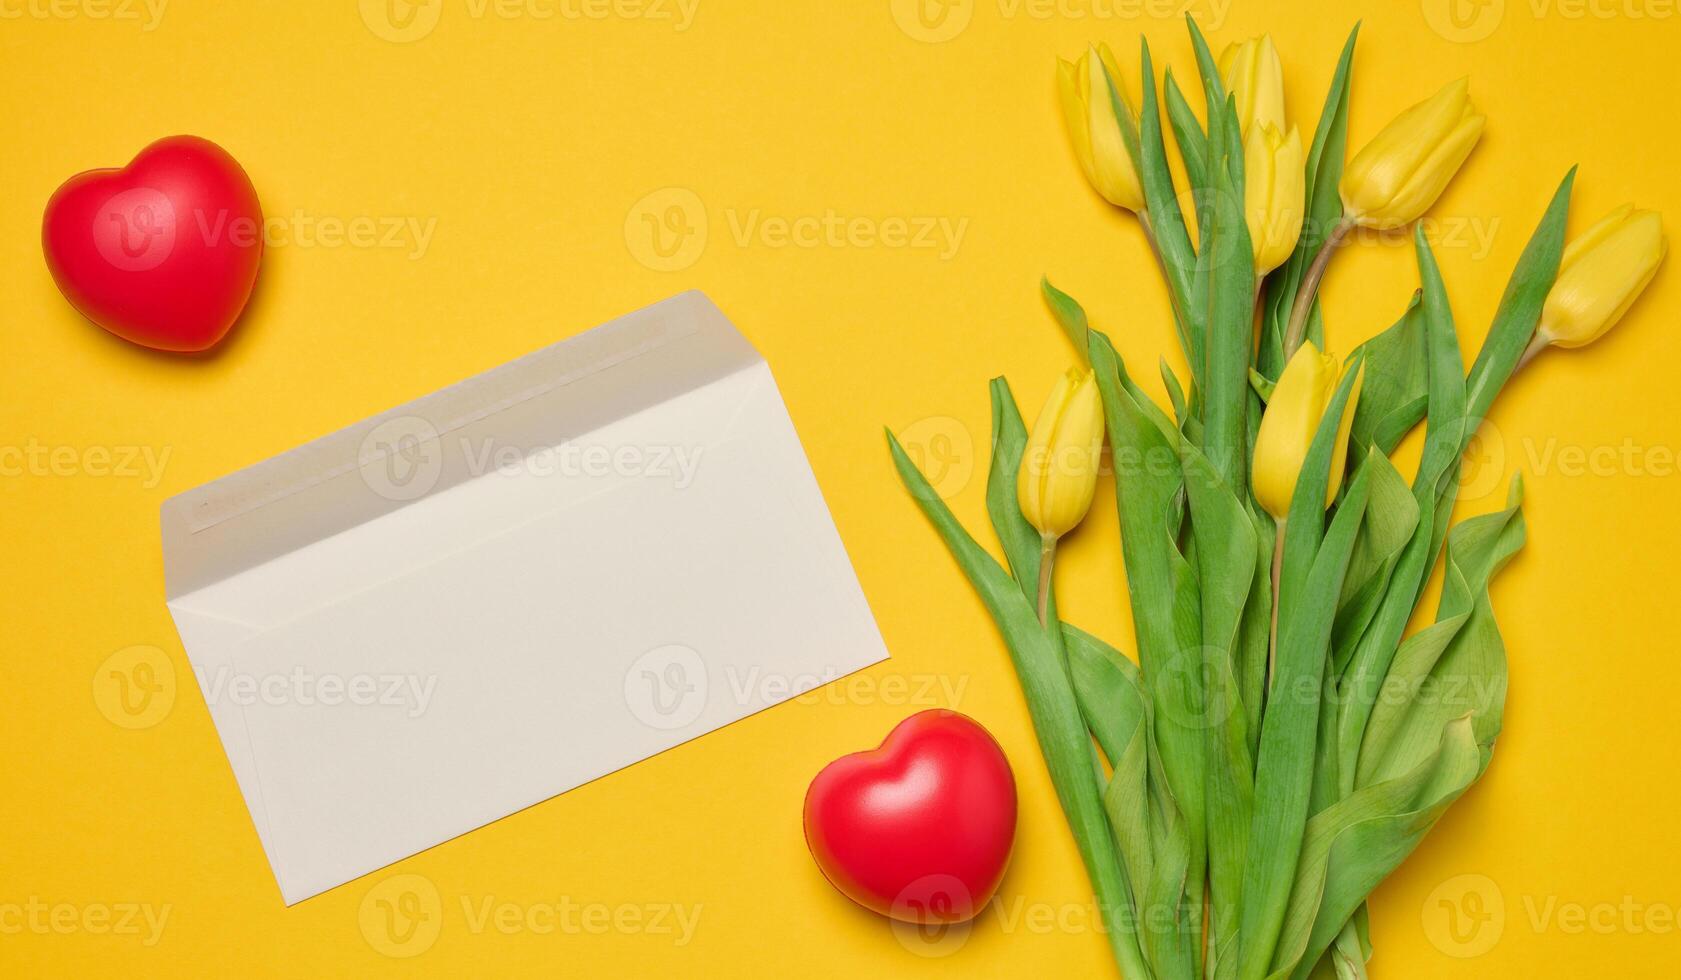 Envelope and red heart and bouquet of blooming tulips with green leaves on a yellow background photo